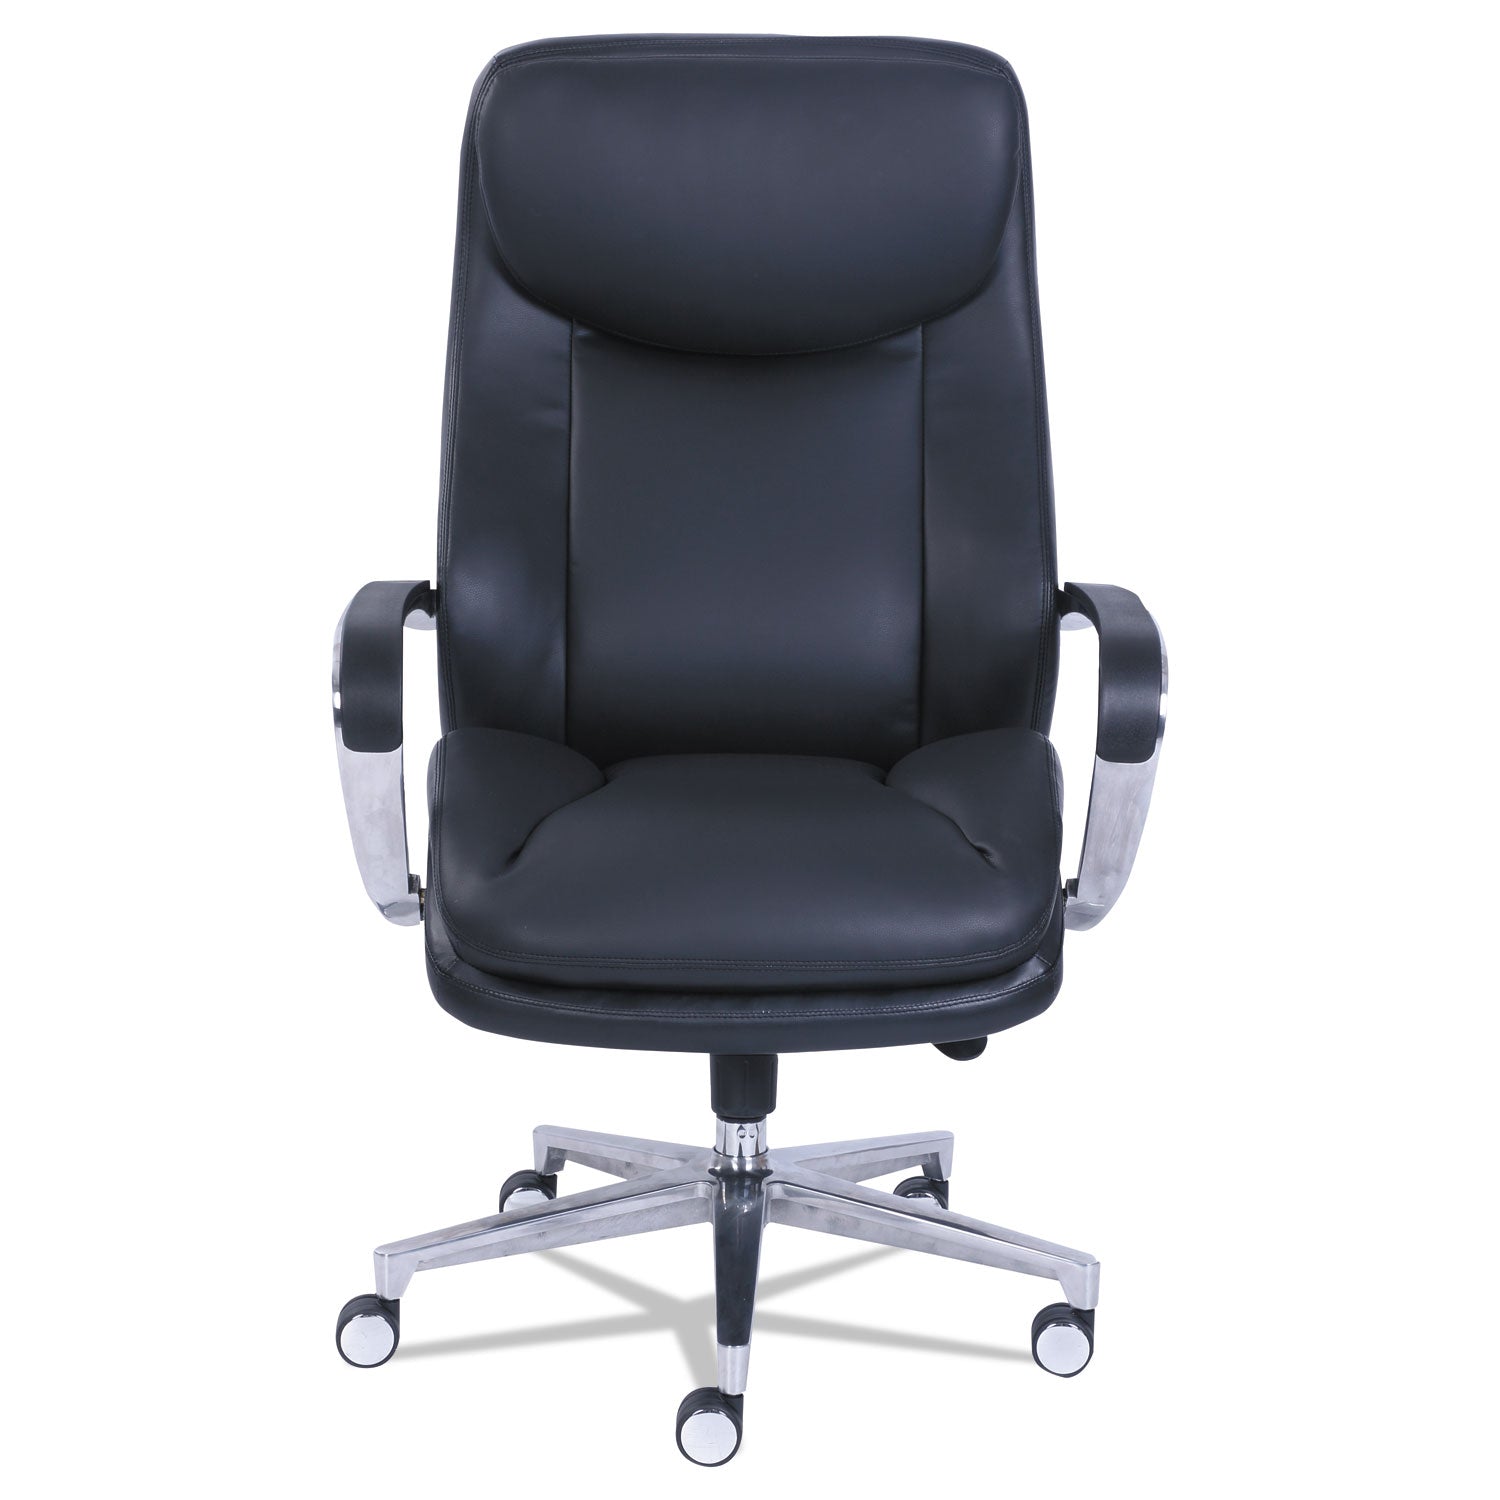 commercial-2000-big-tall-executive-chair-supports-up-to-400-lb-205-to-235-seat-height-black-seat-back-silver-base_lzb48968 - 2